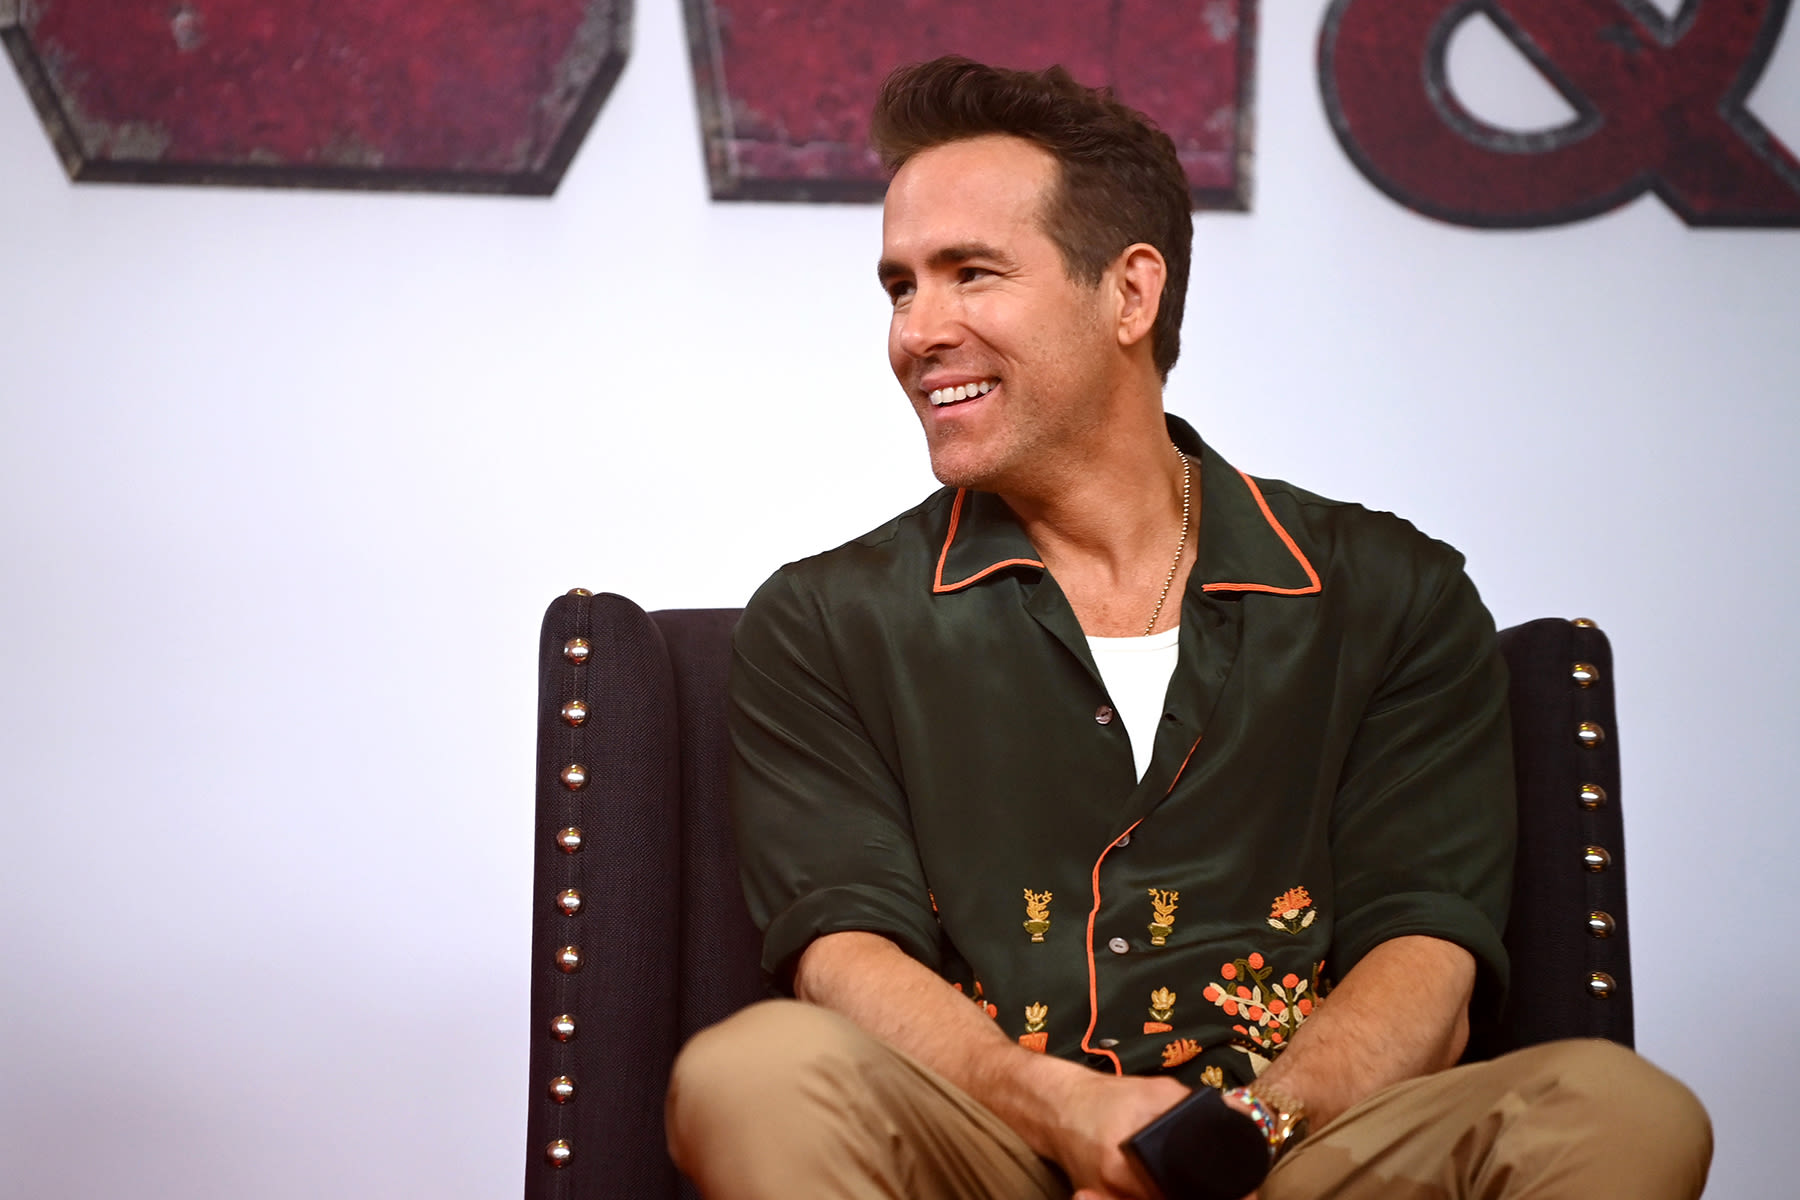 Ryan Reynolds Gave Up His First ‘Deadpool’ Salary to Fund On-Set Writer’s Room